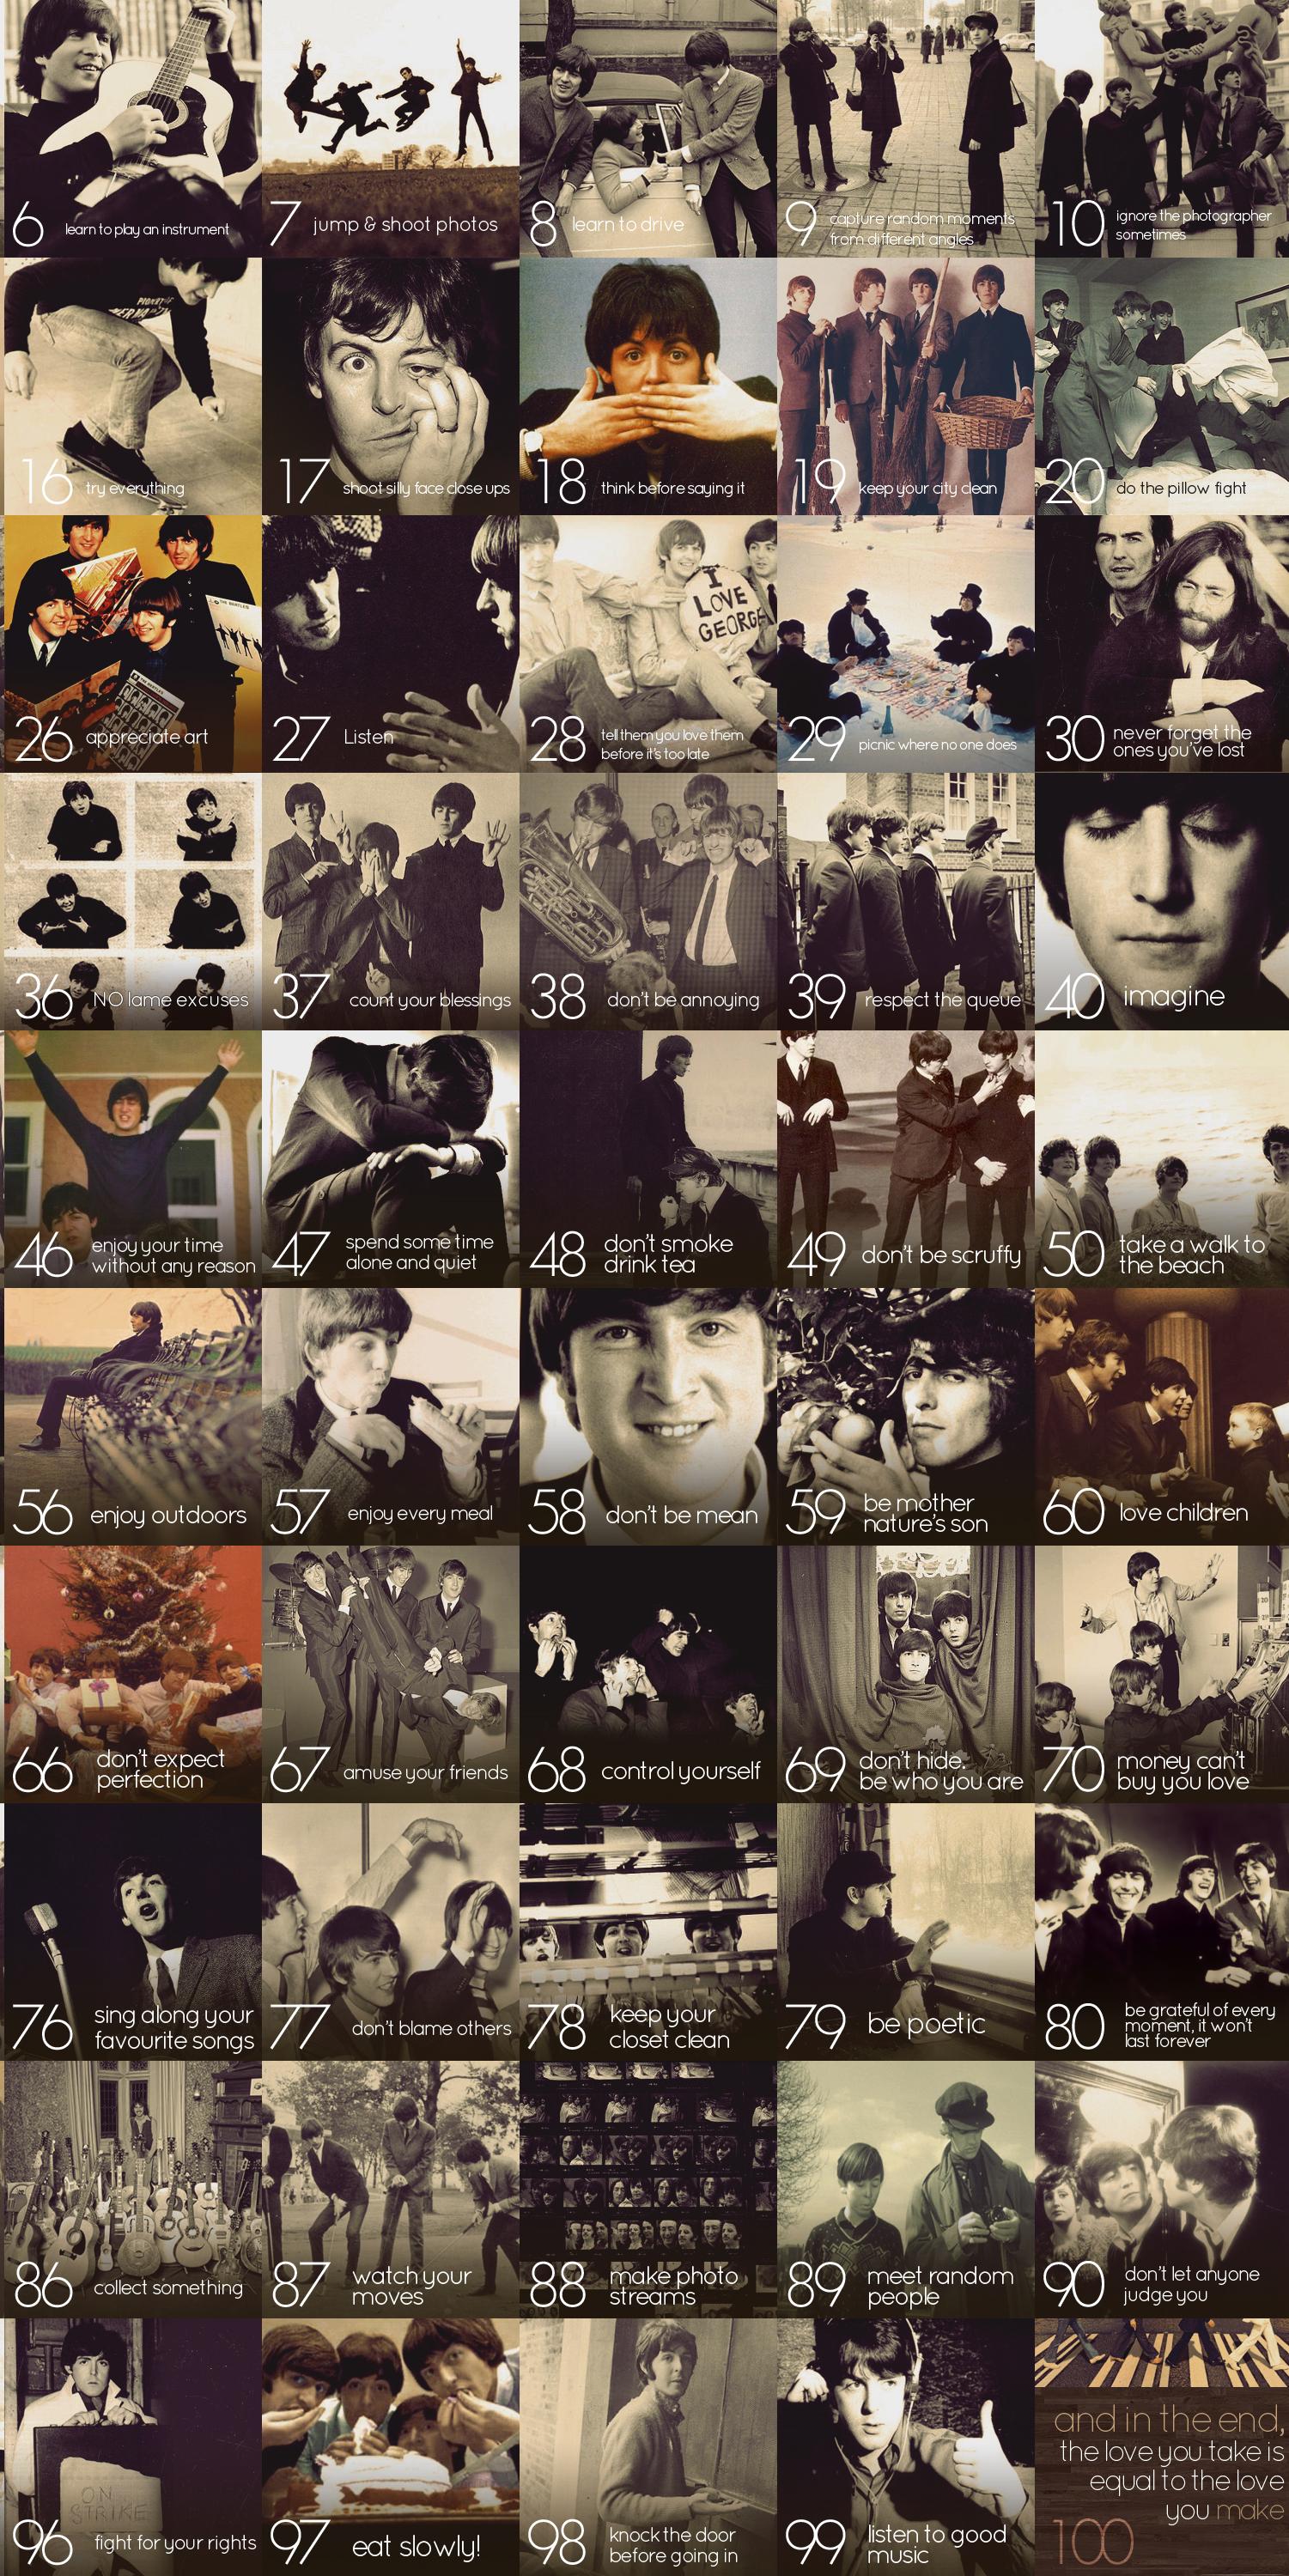 100 life tips by Beatles-2